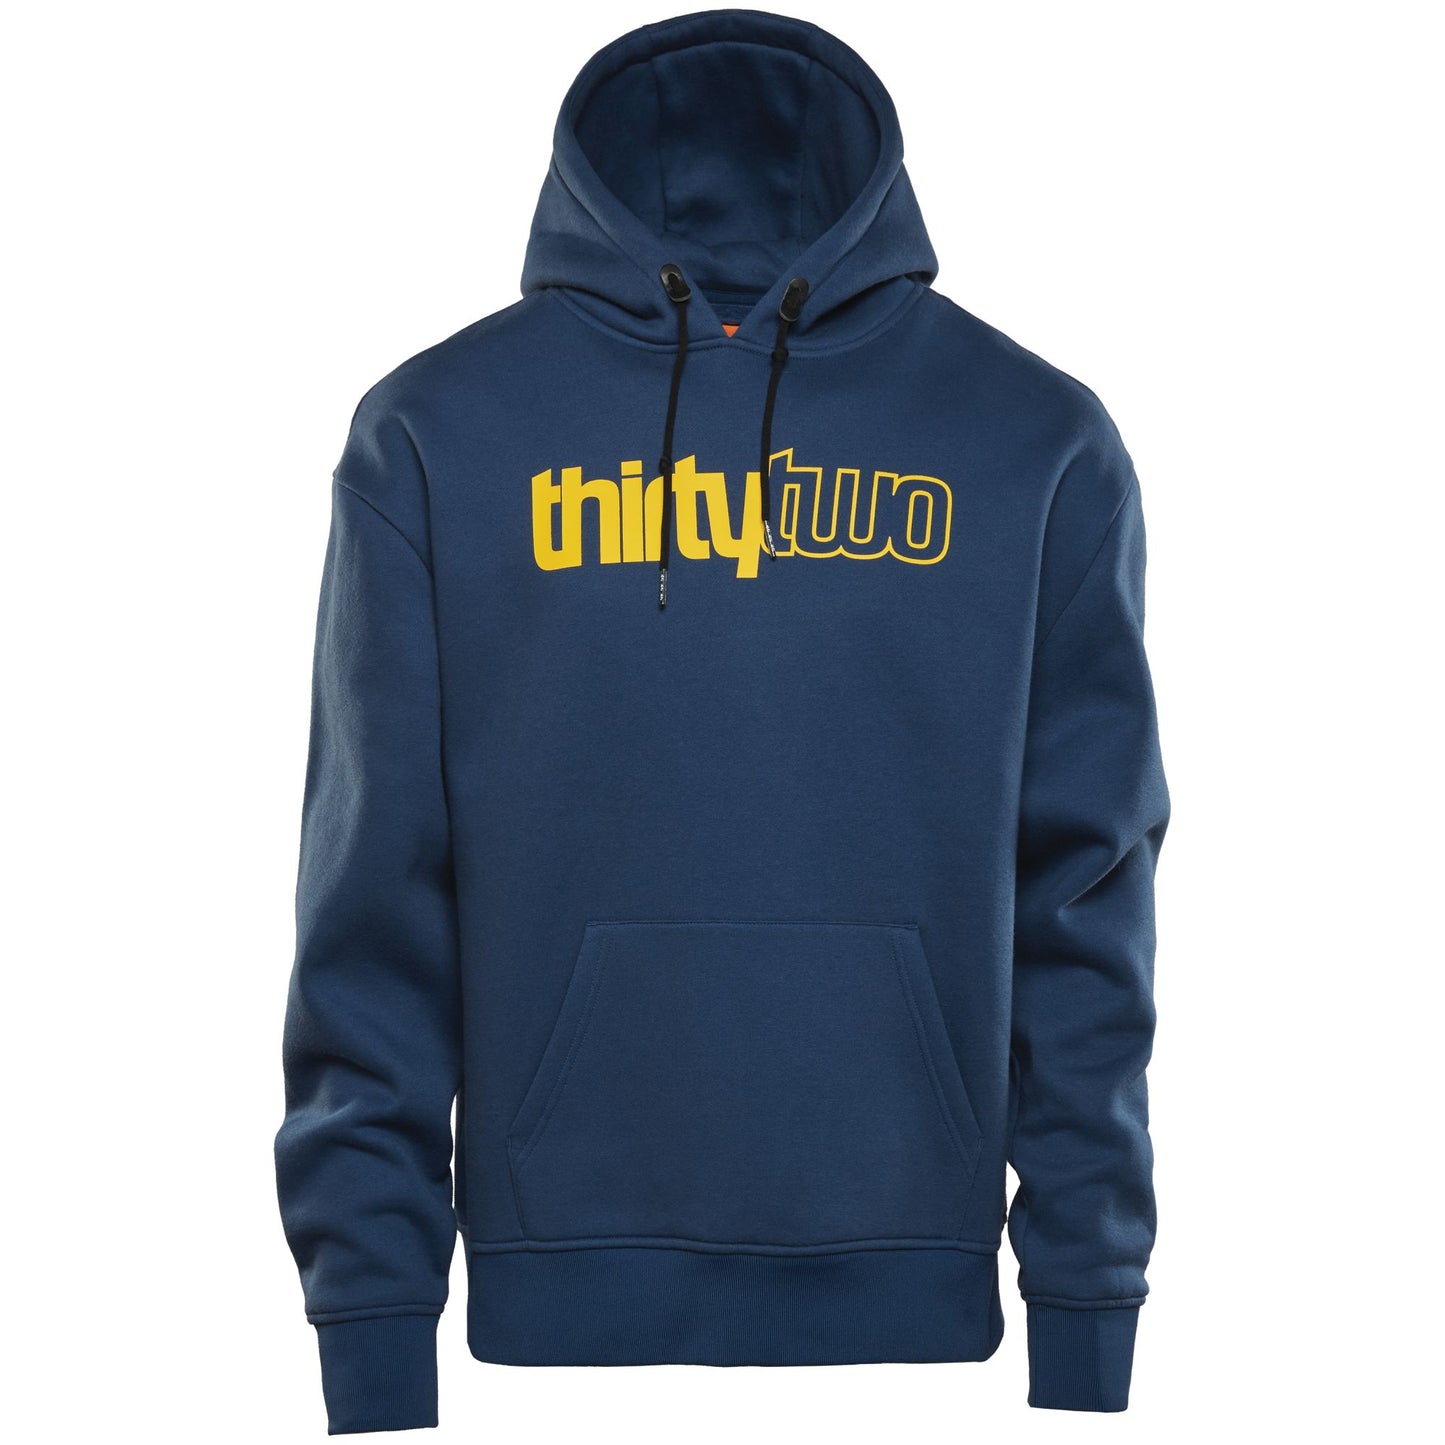 ThirtyTwo Double Tech Hooded Pullover Navy Sweatshirts & Hoodies